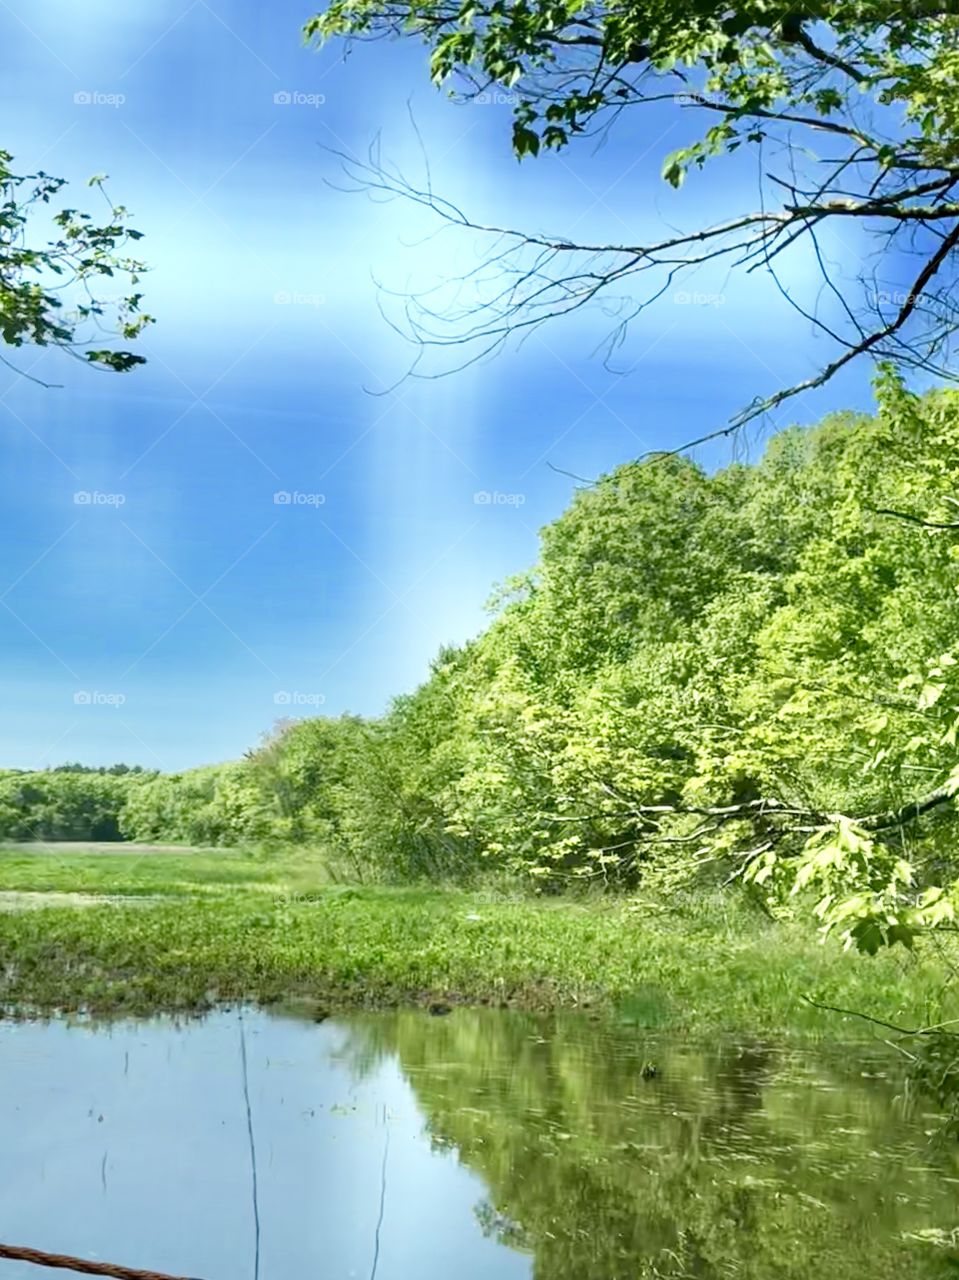 This nature scene offers a scenic view of a pond surrounded by lush greenery, with reflections of blue sky, white cloud & greenery shimmering on the still surface of the water. 